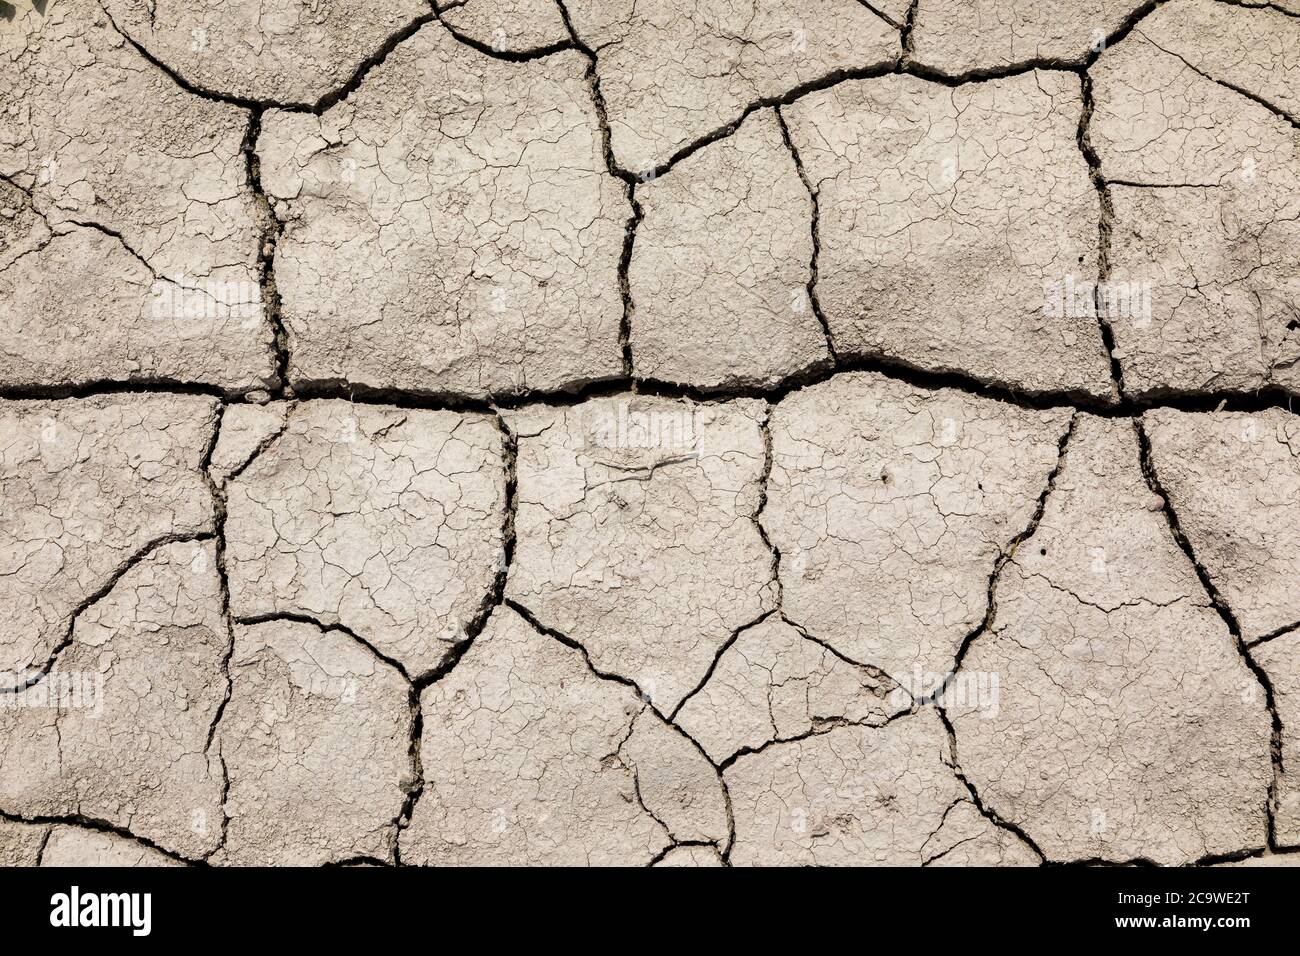 Dry cracked soil. The fields are missing rain. Stock Photo